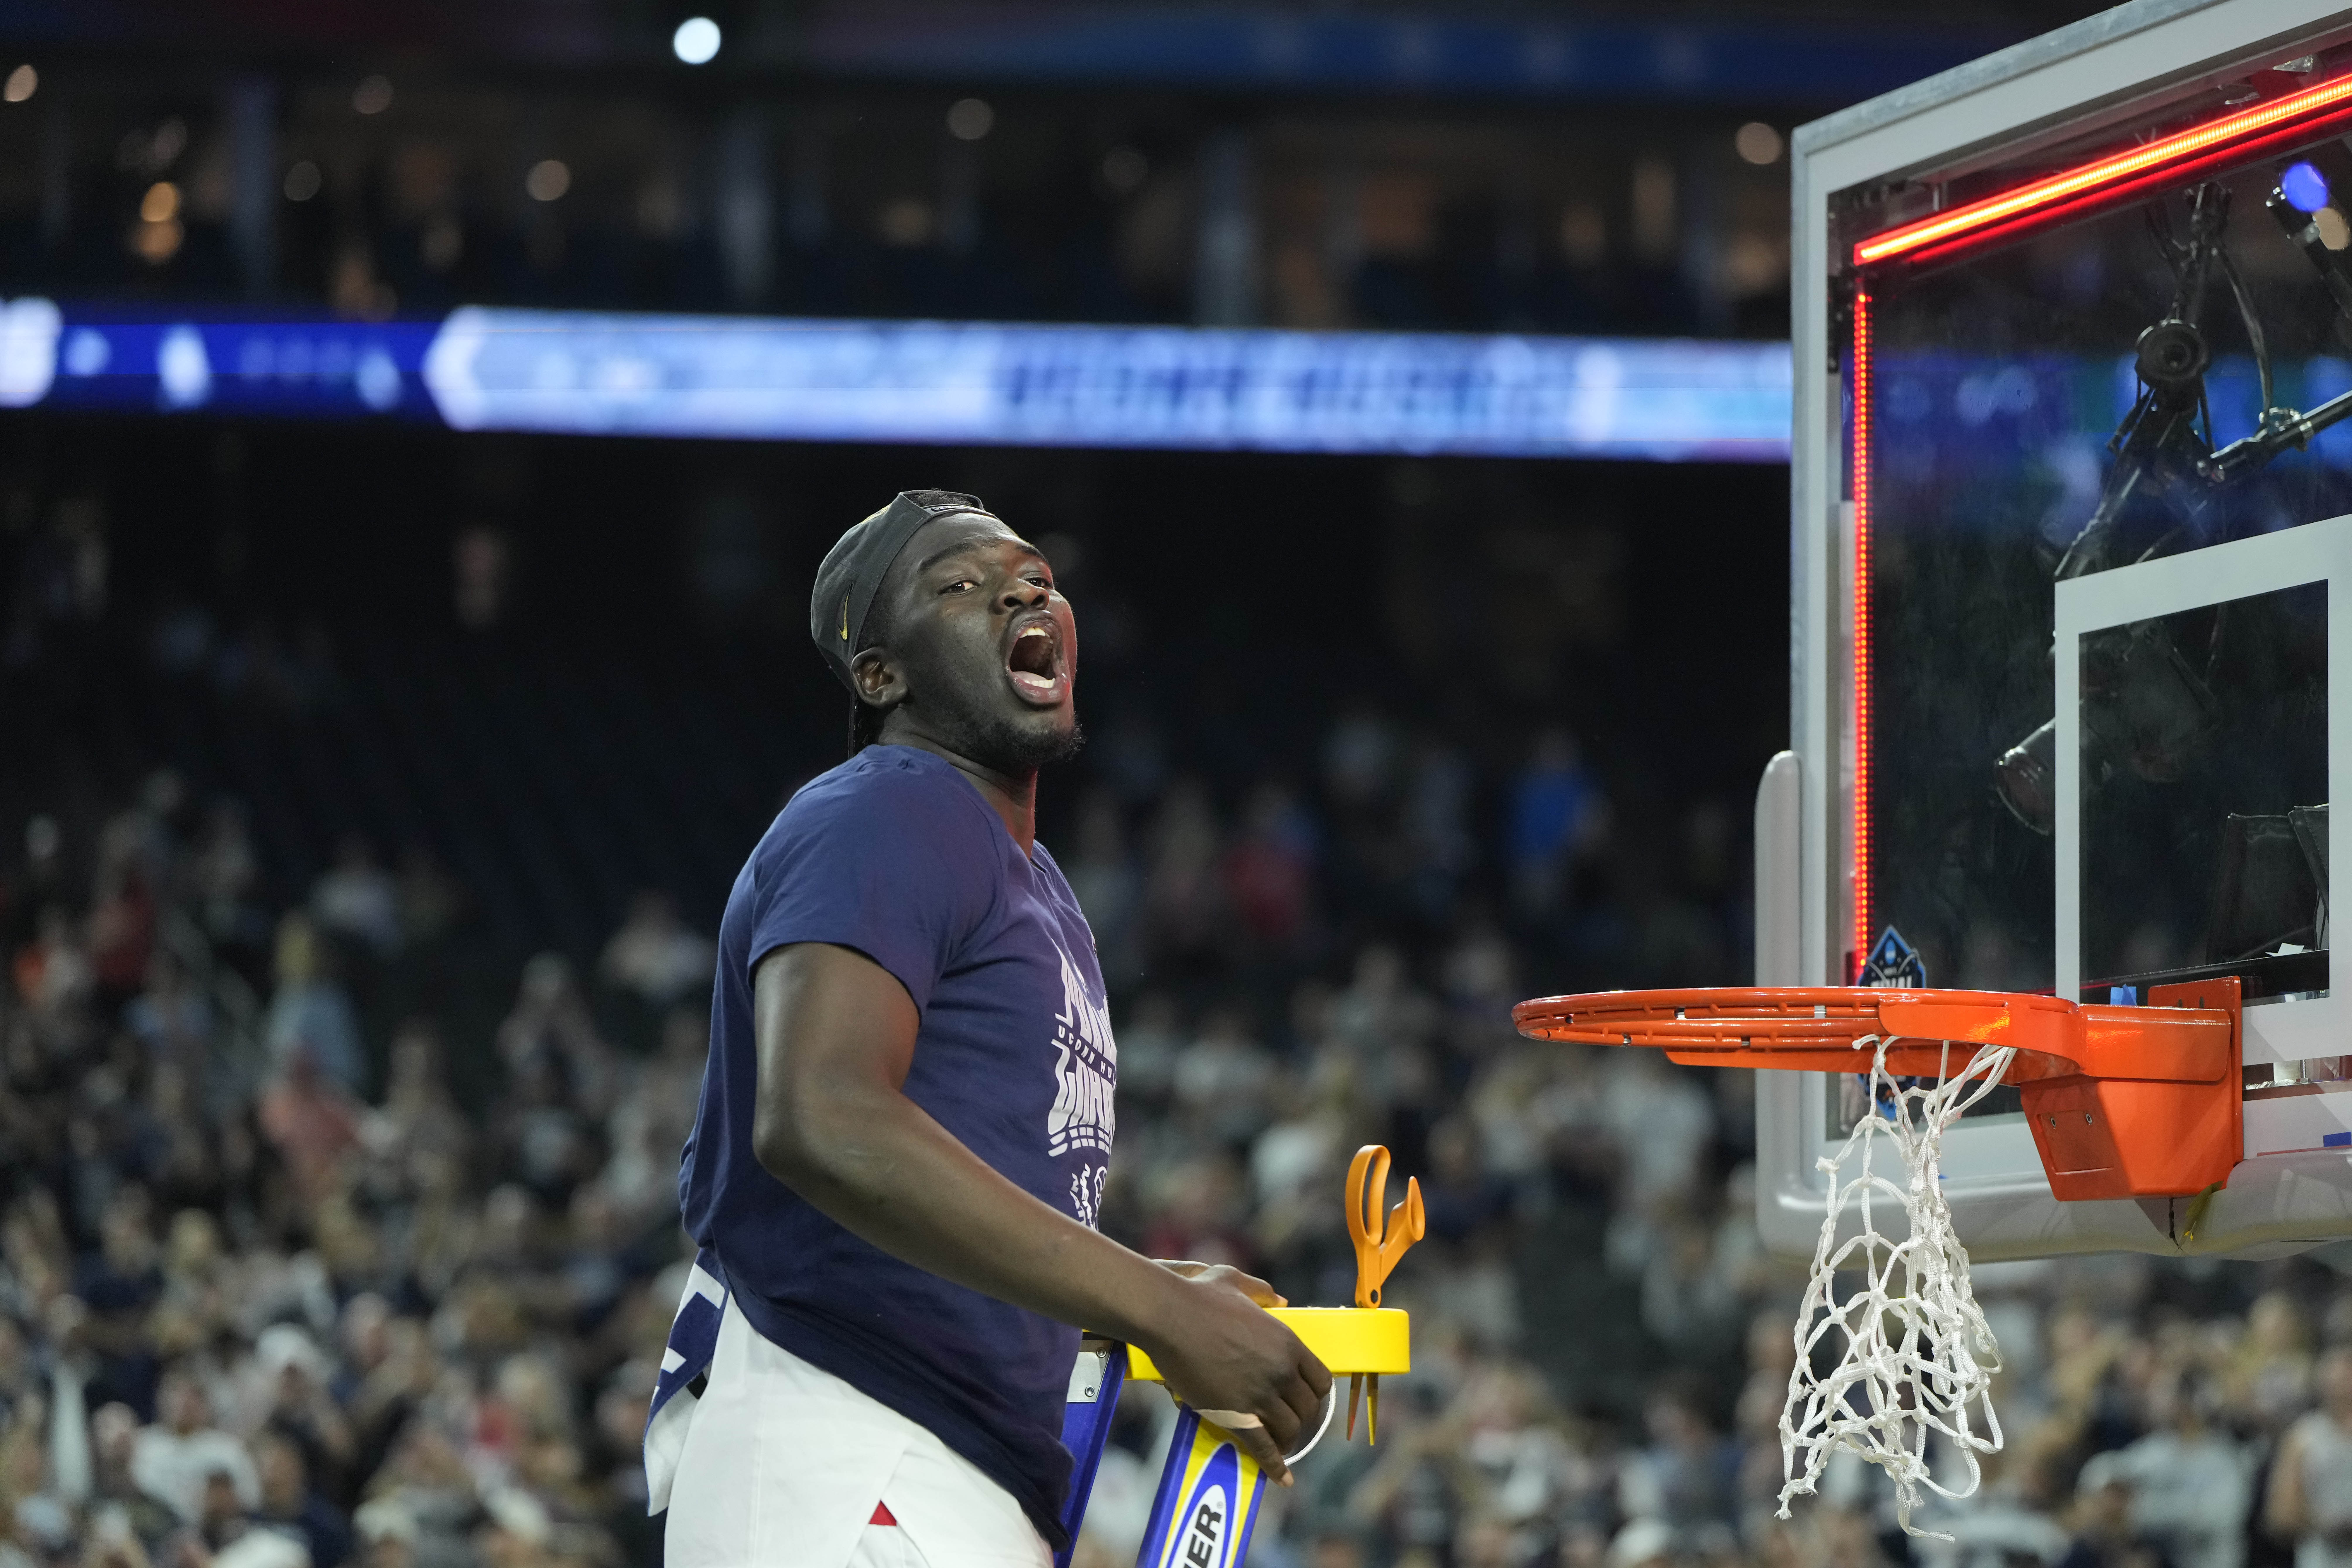 NBA Draft Adama Sanogo Could Be Inexpensive Solution to Thunder’s